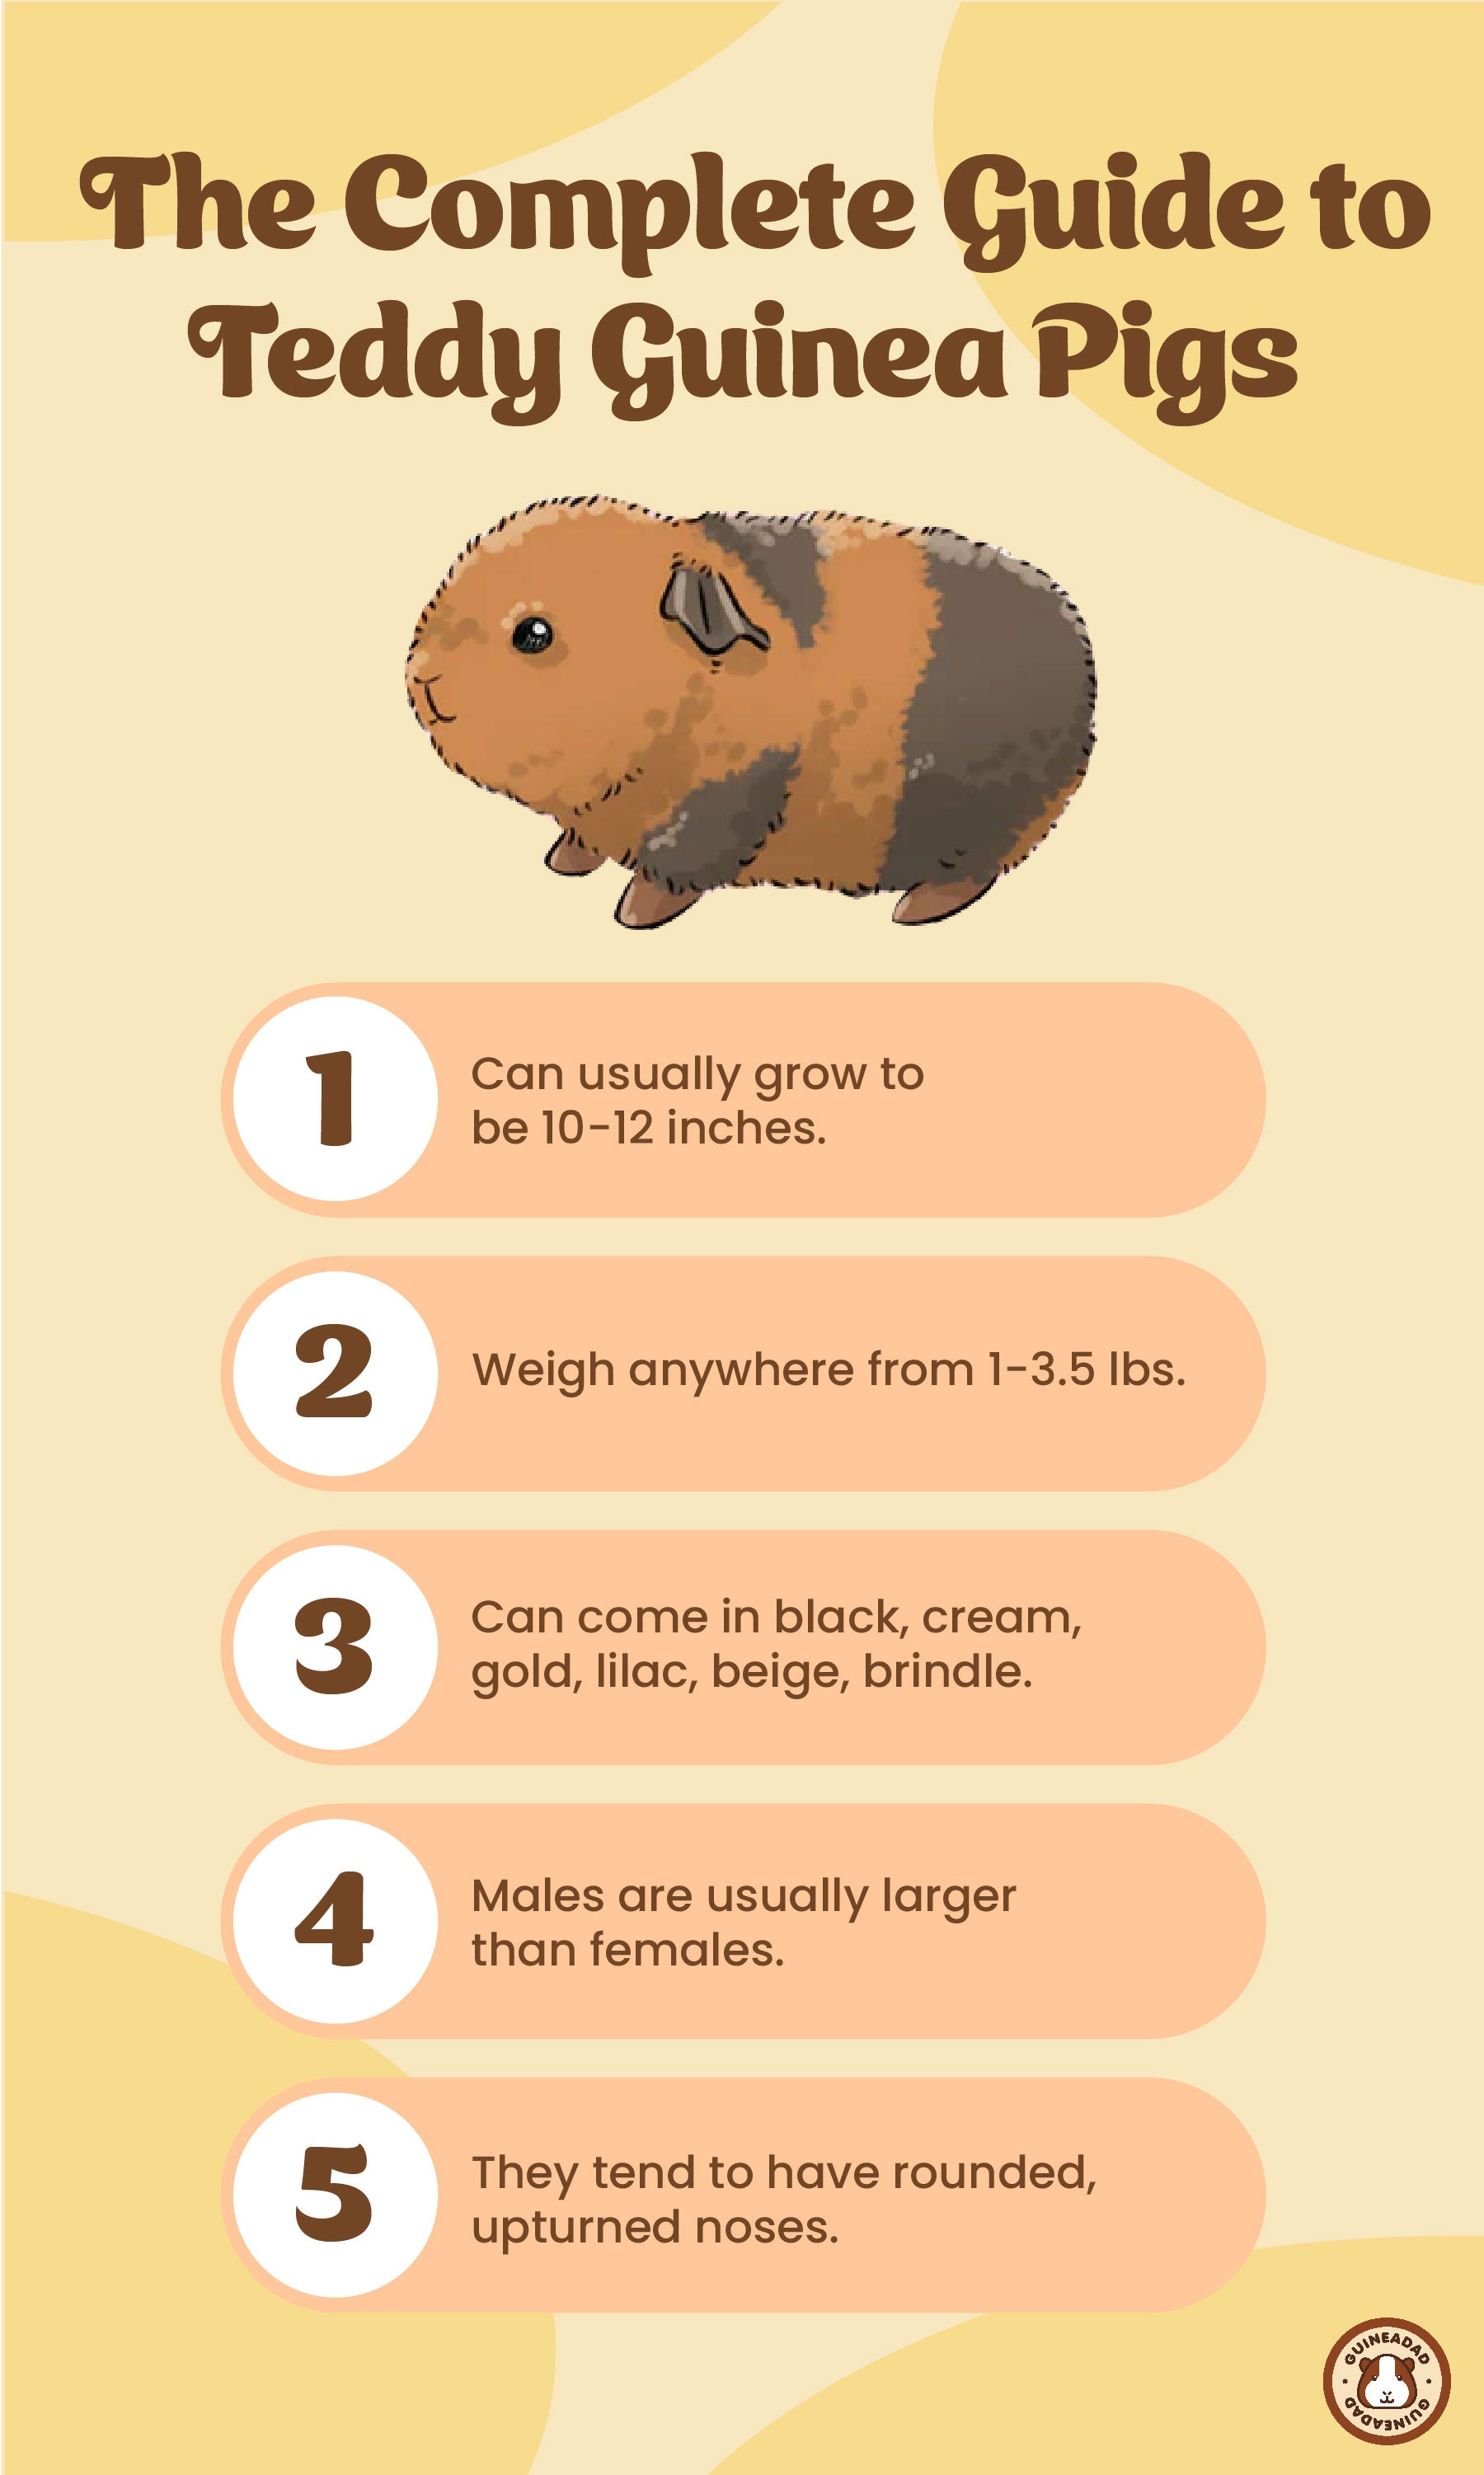 Infographic displaying the physical characteristics of teddy guinea pigs